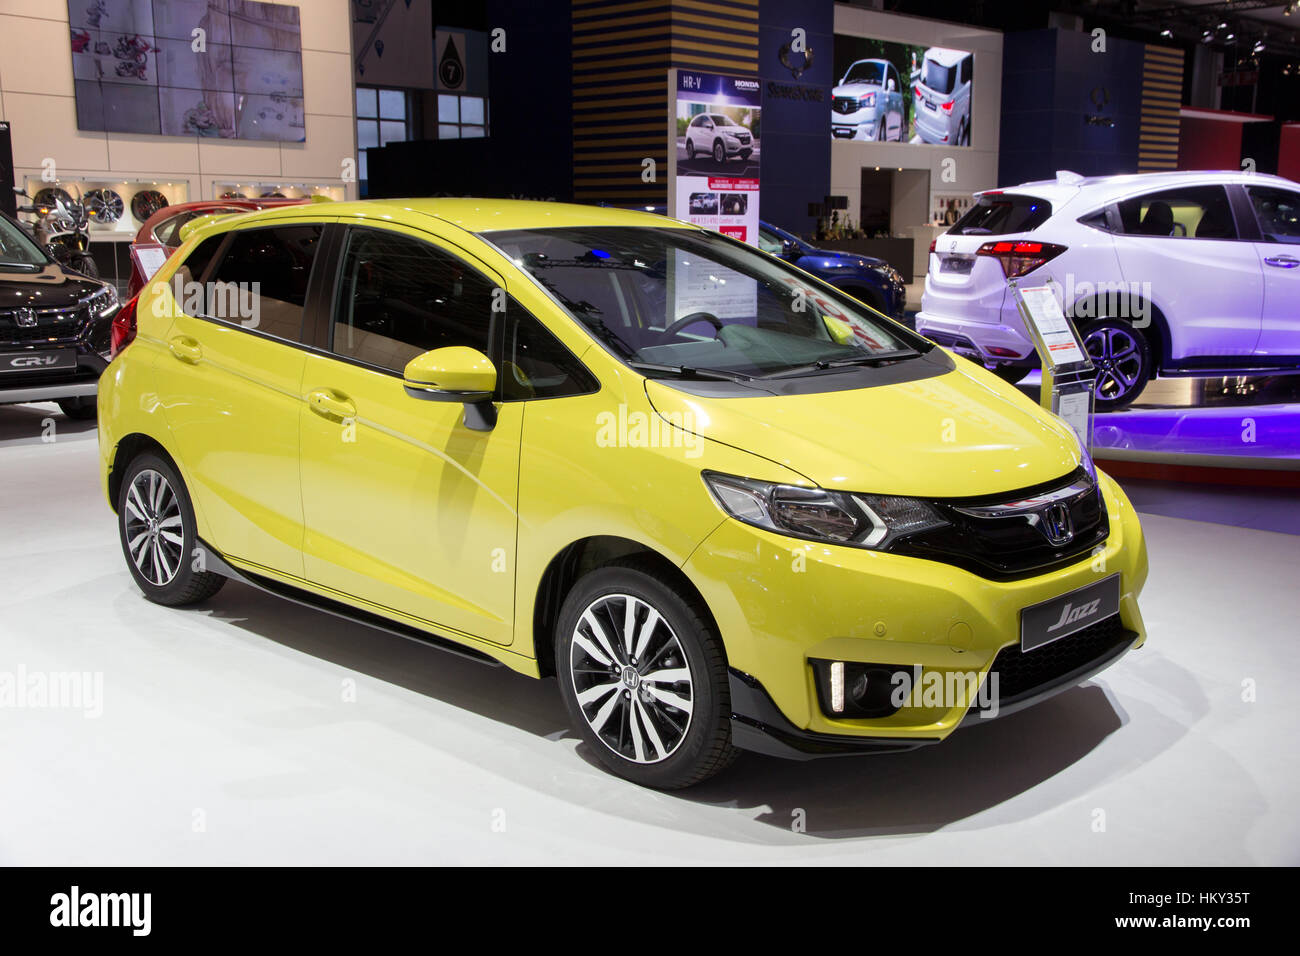 BRUSSELS - JAN 12, 2016: Honda Jazz on display at the Brussels Motor Show. Stock Photo